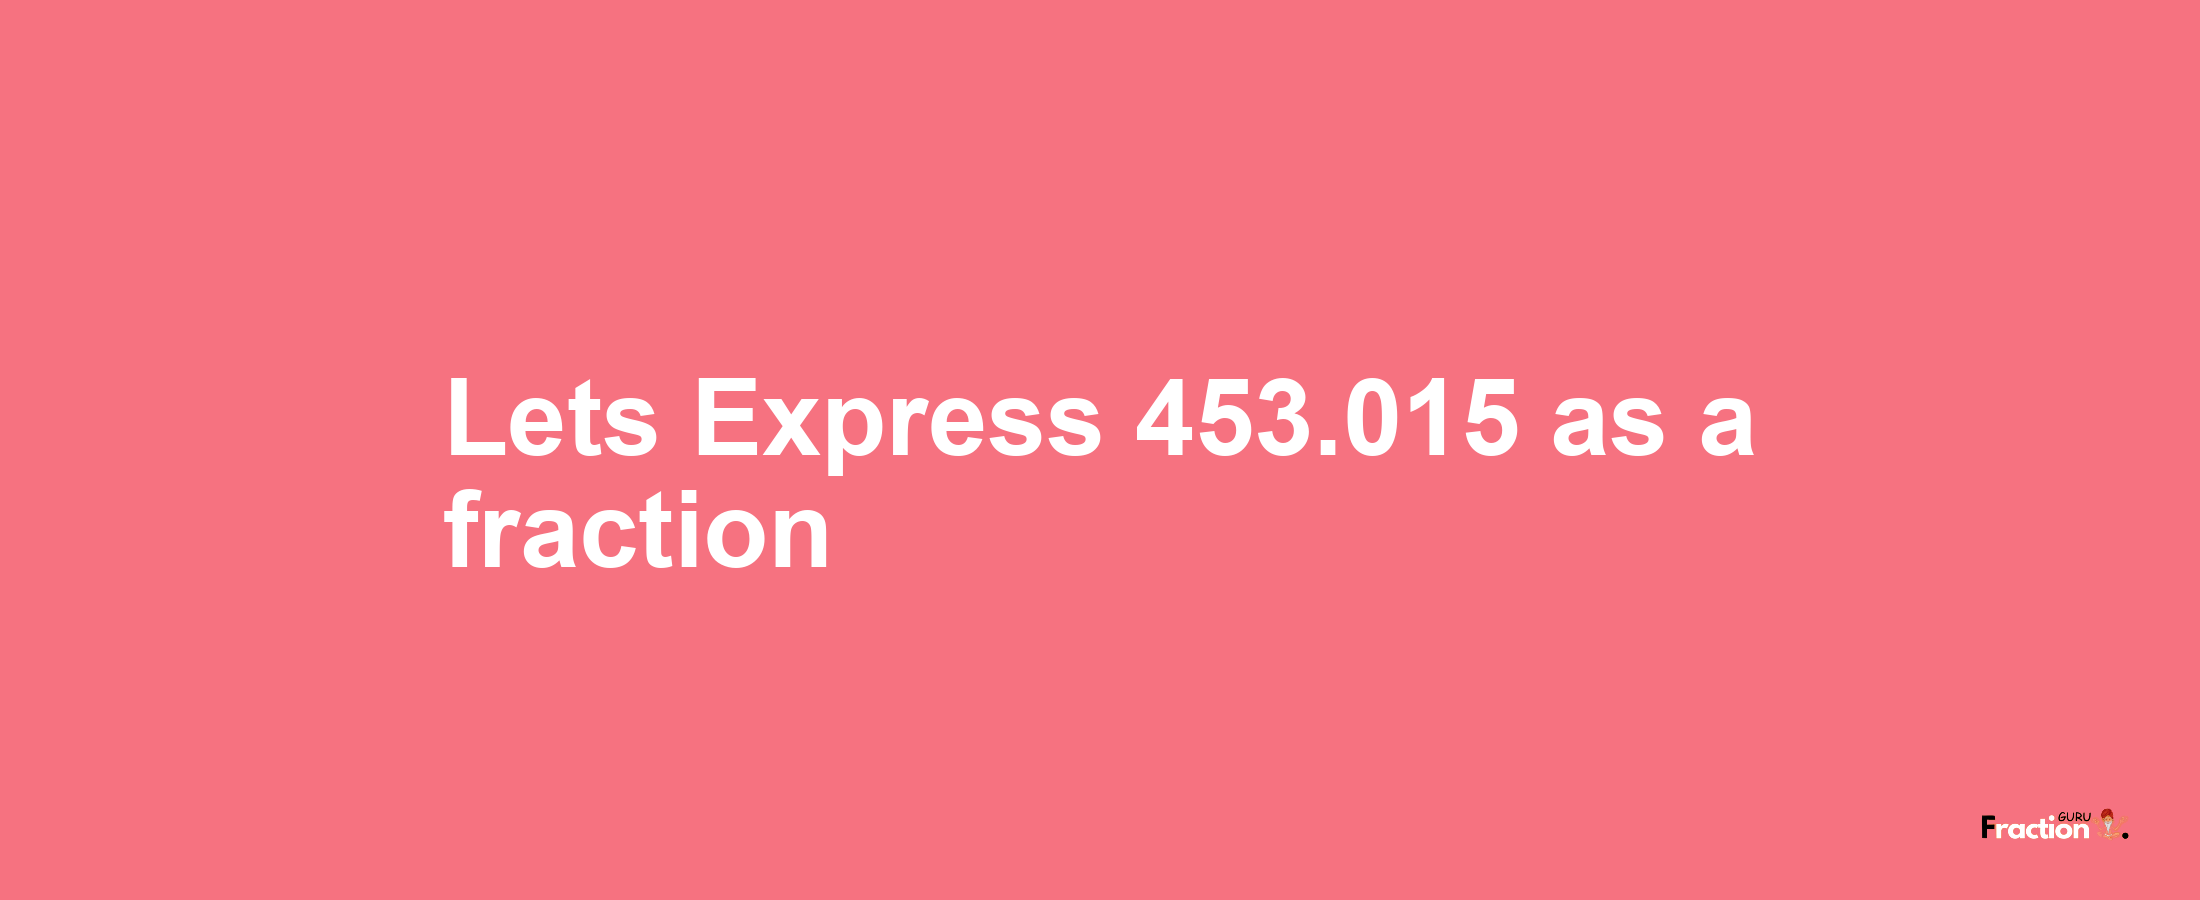 Lets Express 453.015 as afraction